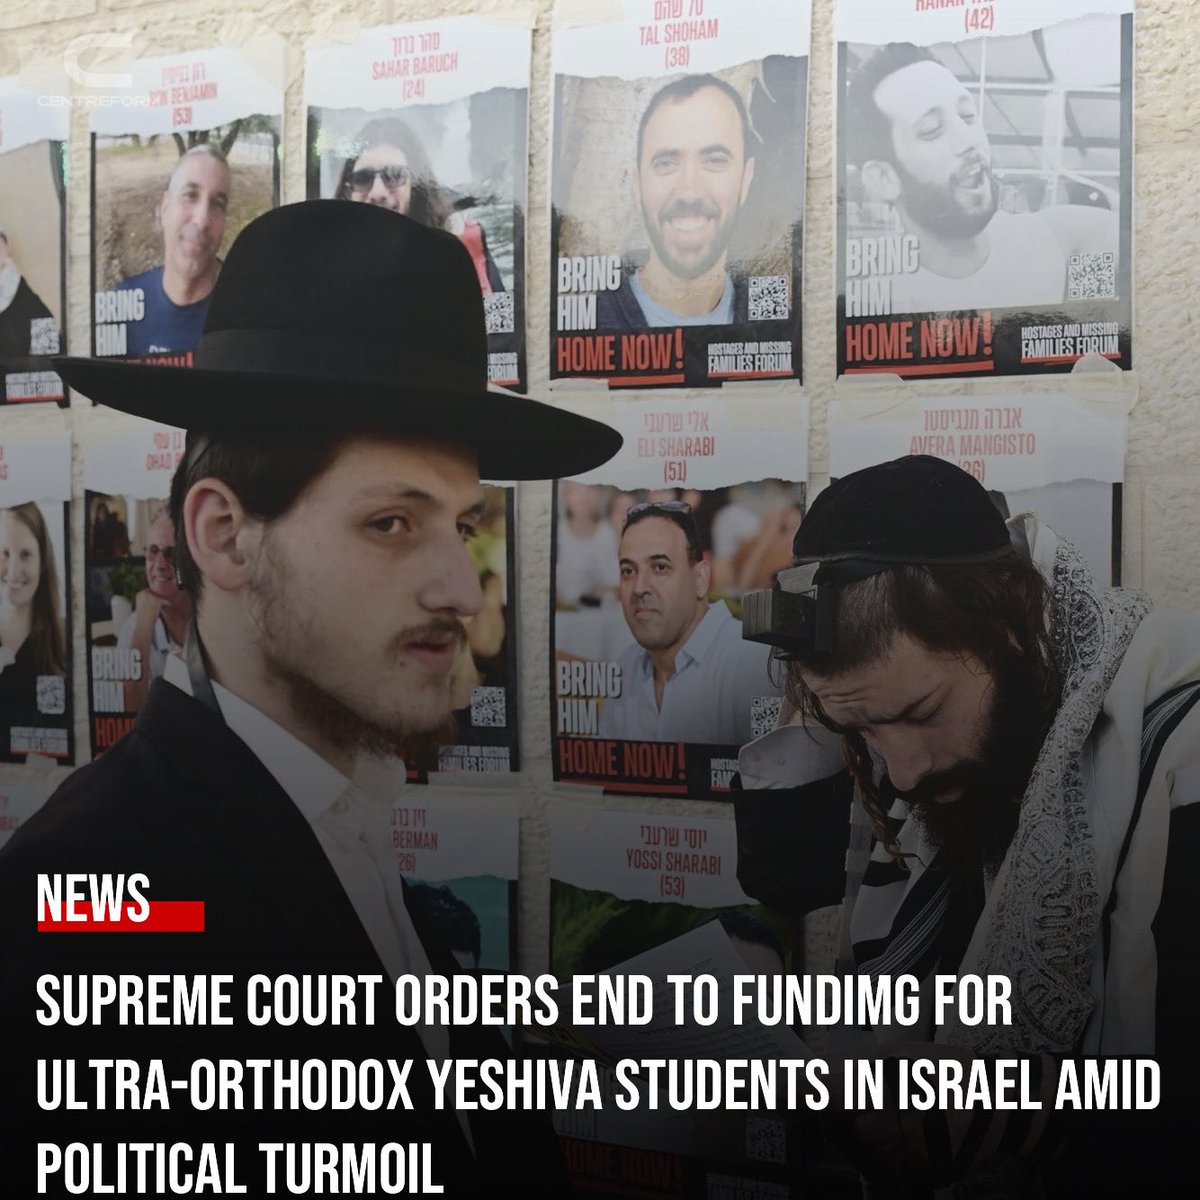 Israel's Supreme Court has made a landmark ruling to halt state funding for ultra-Orthodox yeshiva students who don't serve in the military, a decision that could have significant political repercussions for Prime Minister Benjamin Netanyahu. This move intensifies tensions over